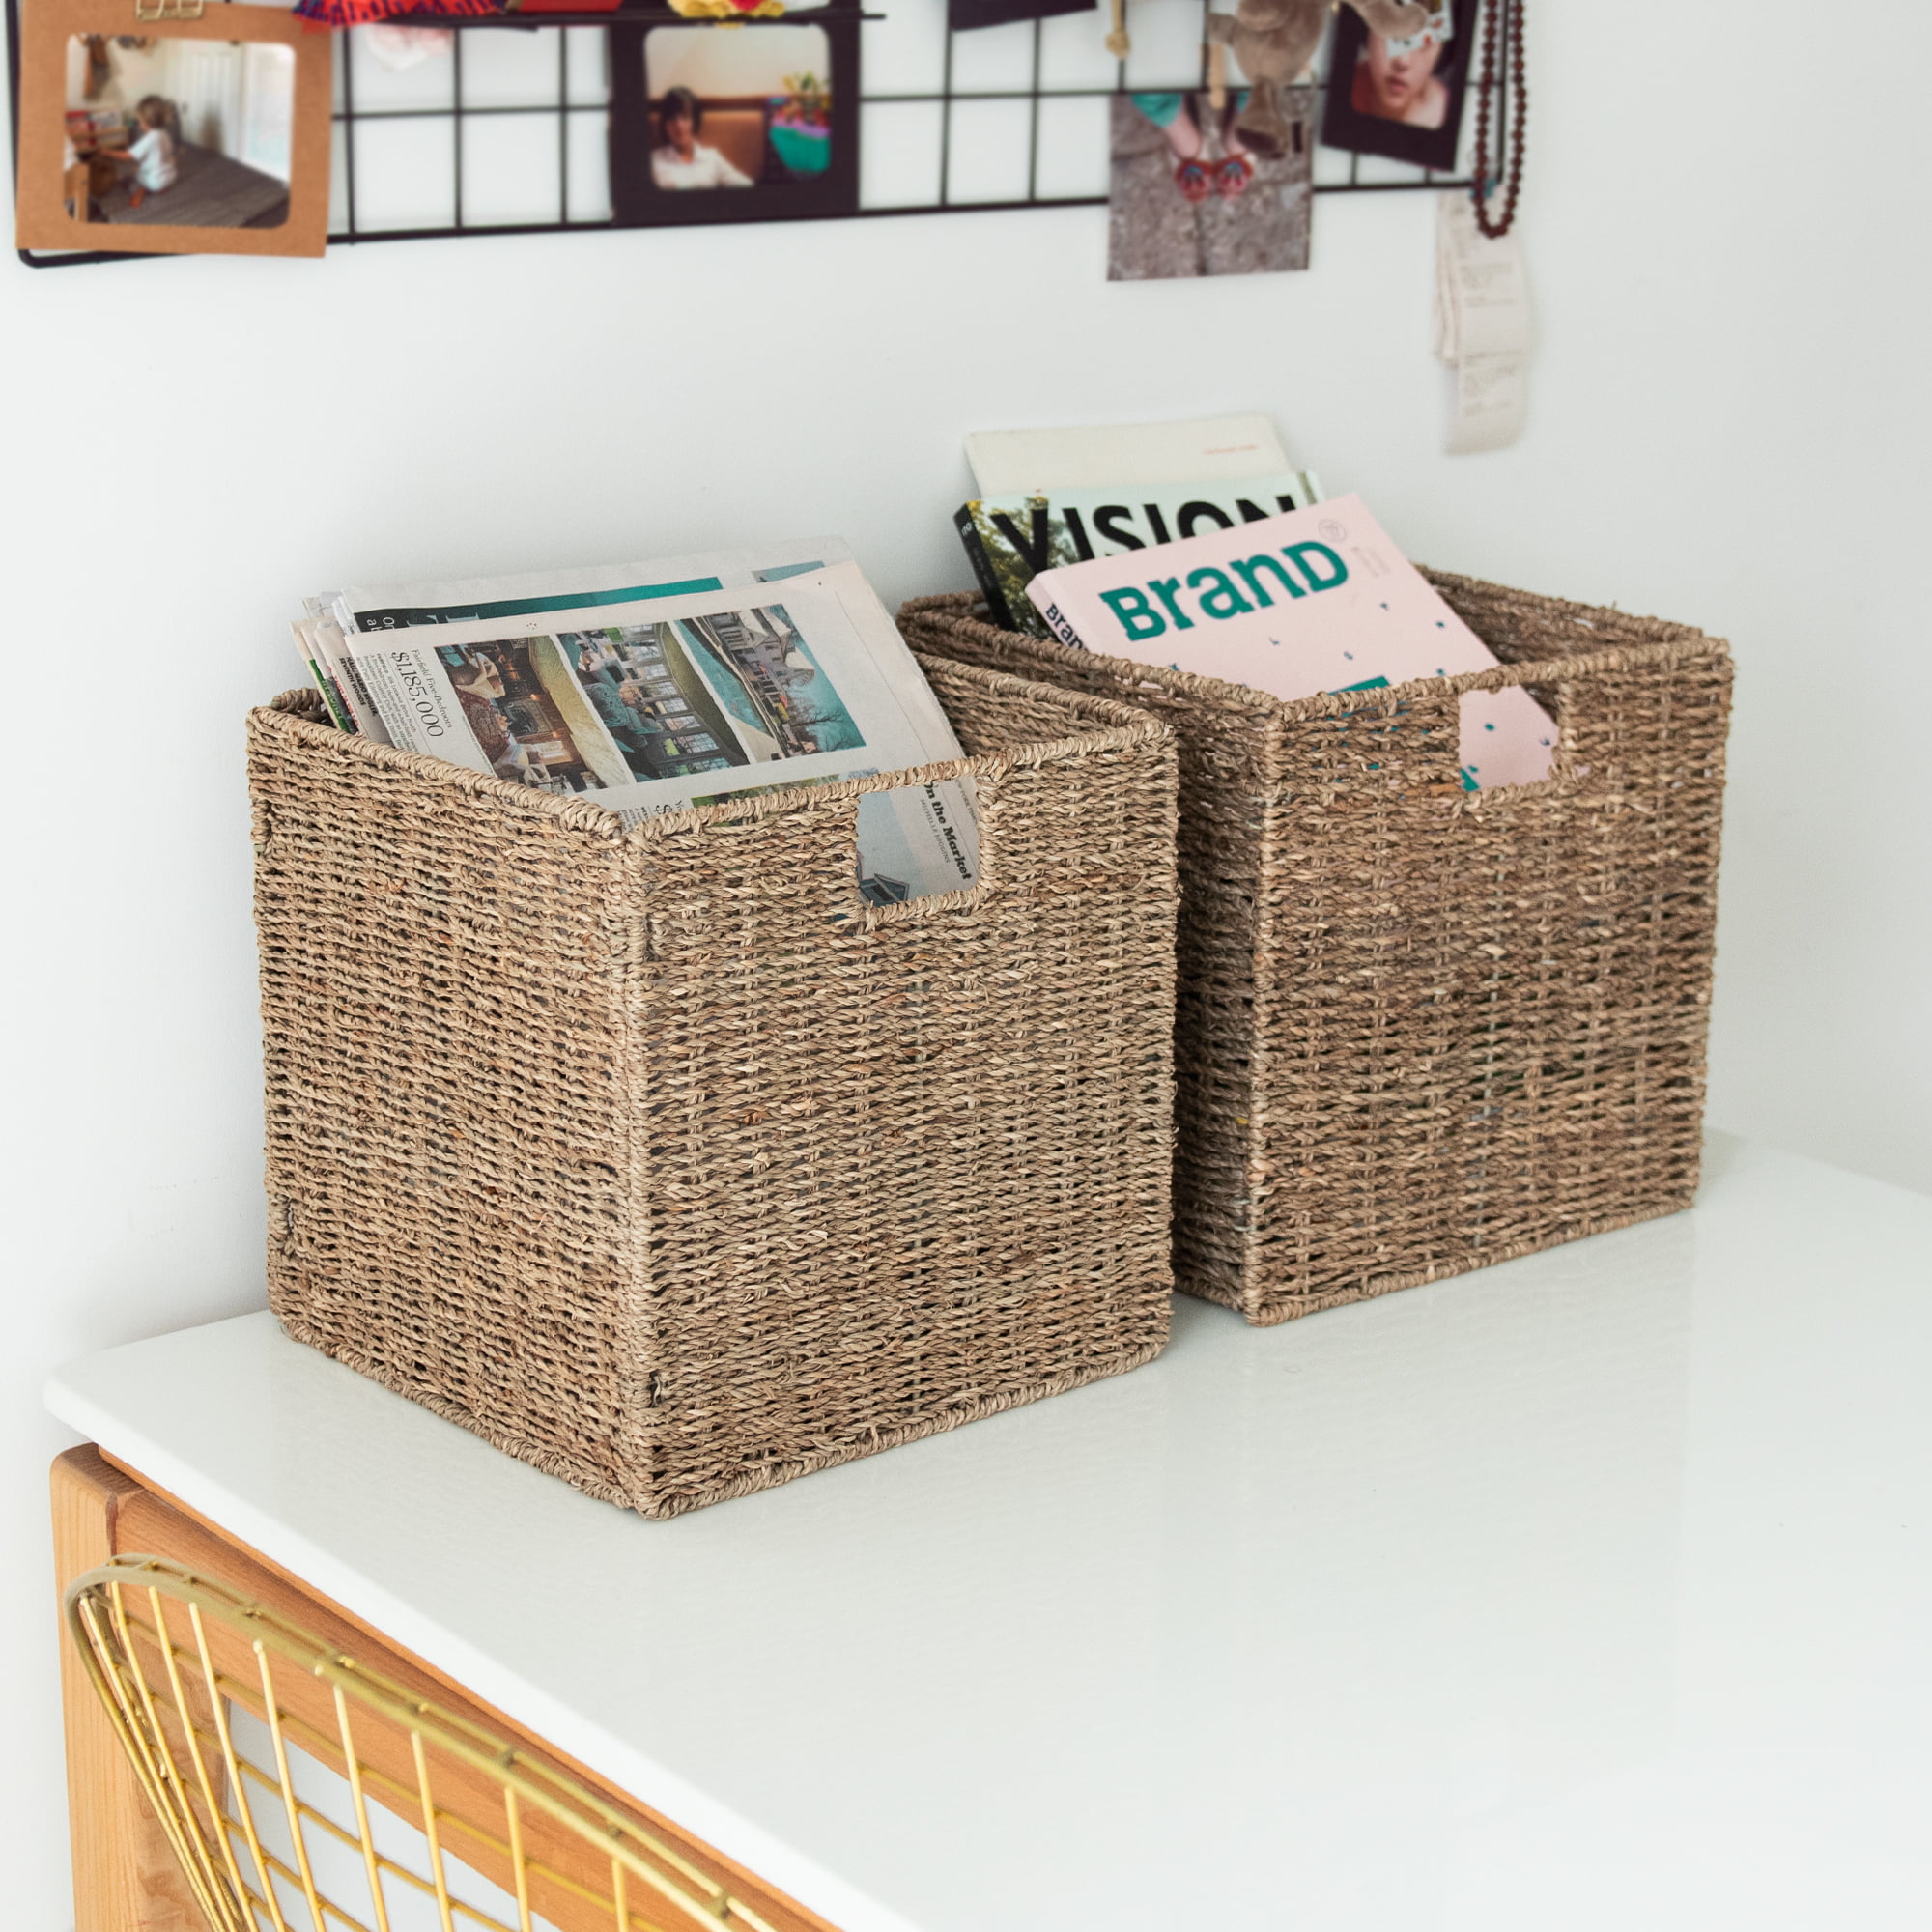 DINGTAI Seagrass Storage Baskets with Labels, 10.5x9x7.5in Wicker Storage Basket, 4 Pack Woven Storage Baskets, Pantry Baskets Organization,Vintage